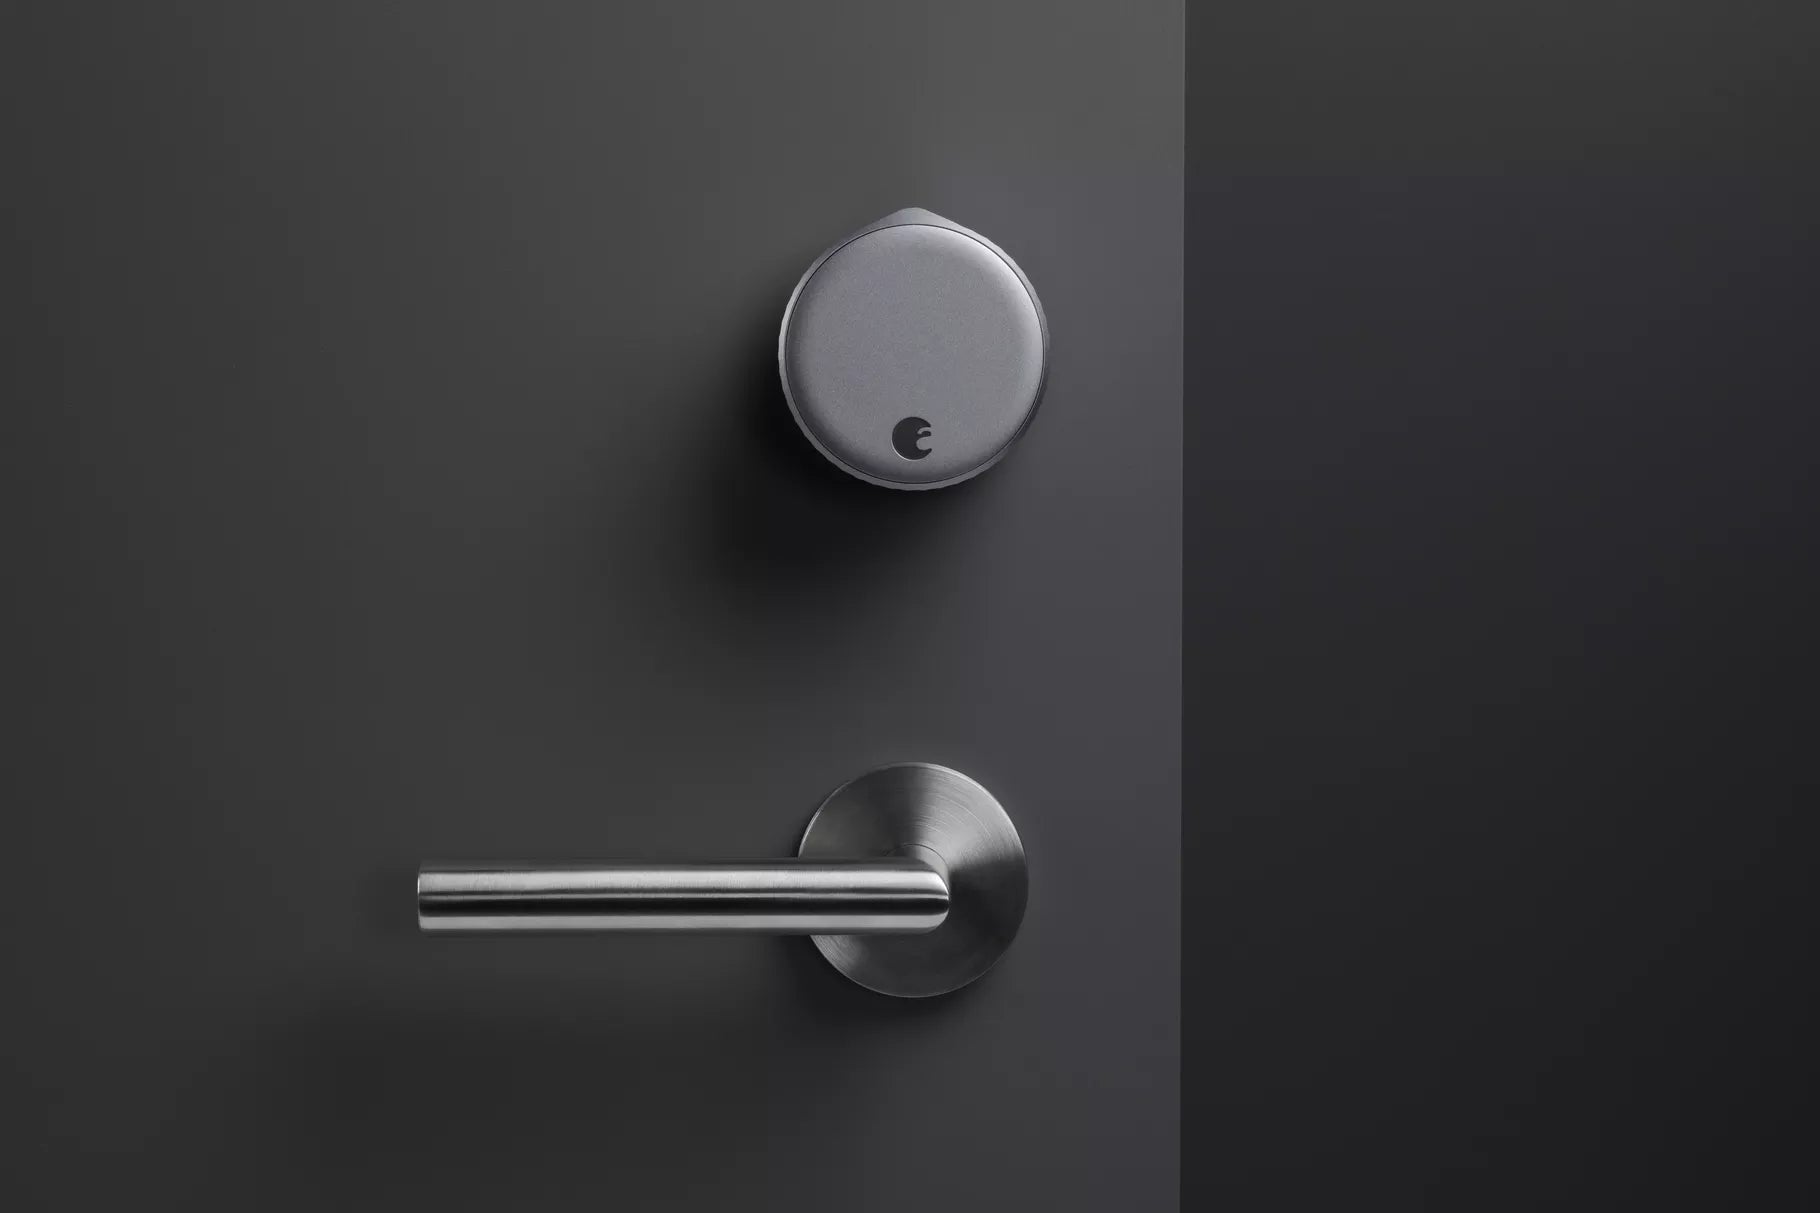 The August Wi-Fi Smart Lock Is Now 5GHz Wi-Fi Compatible